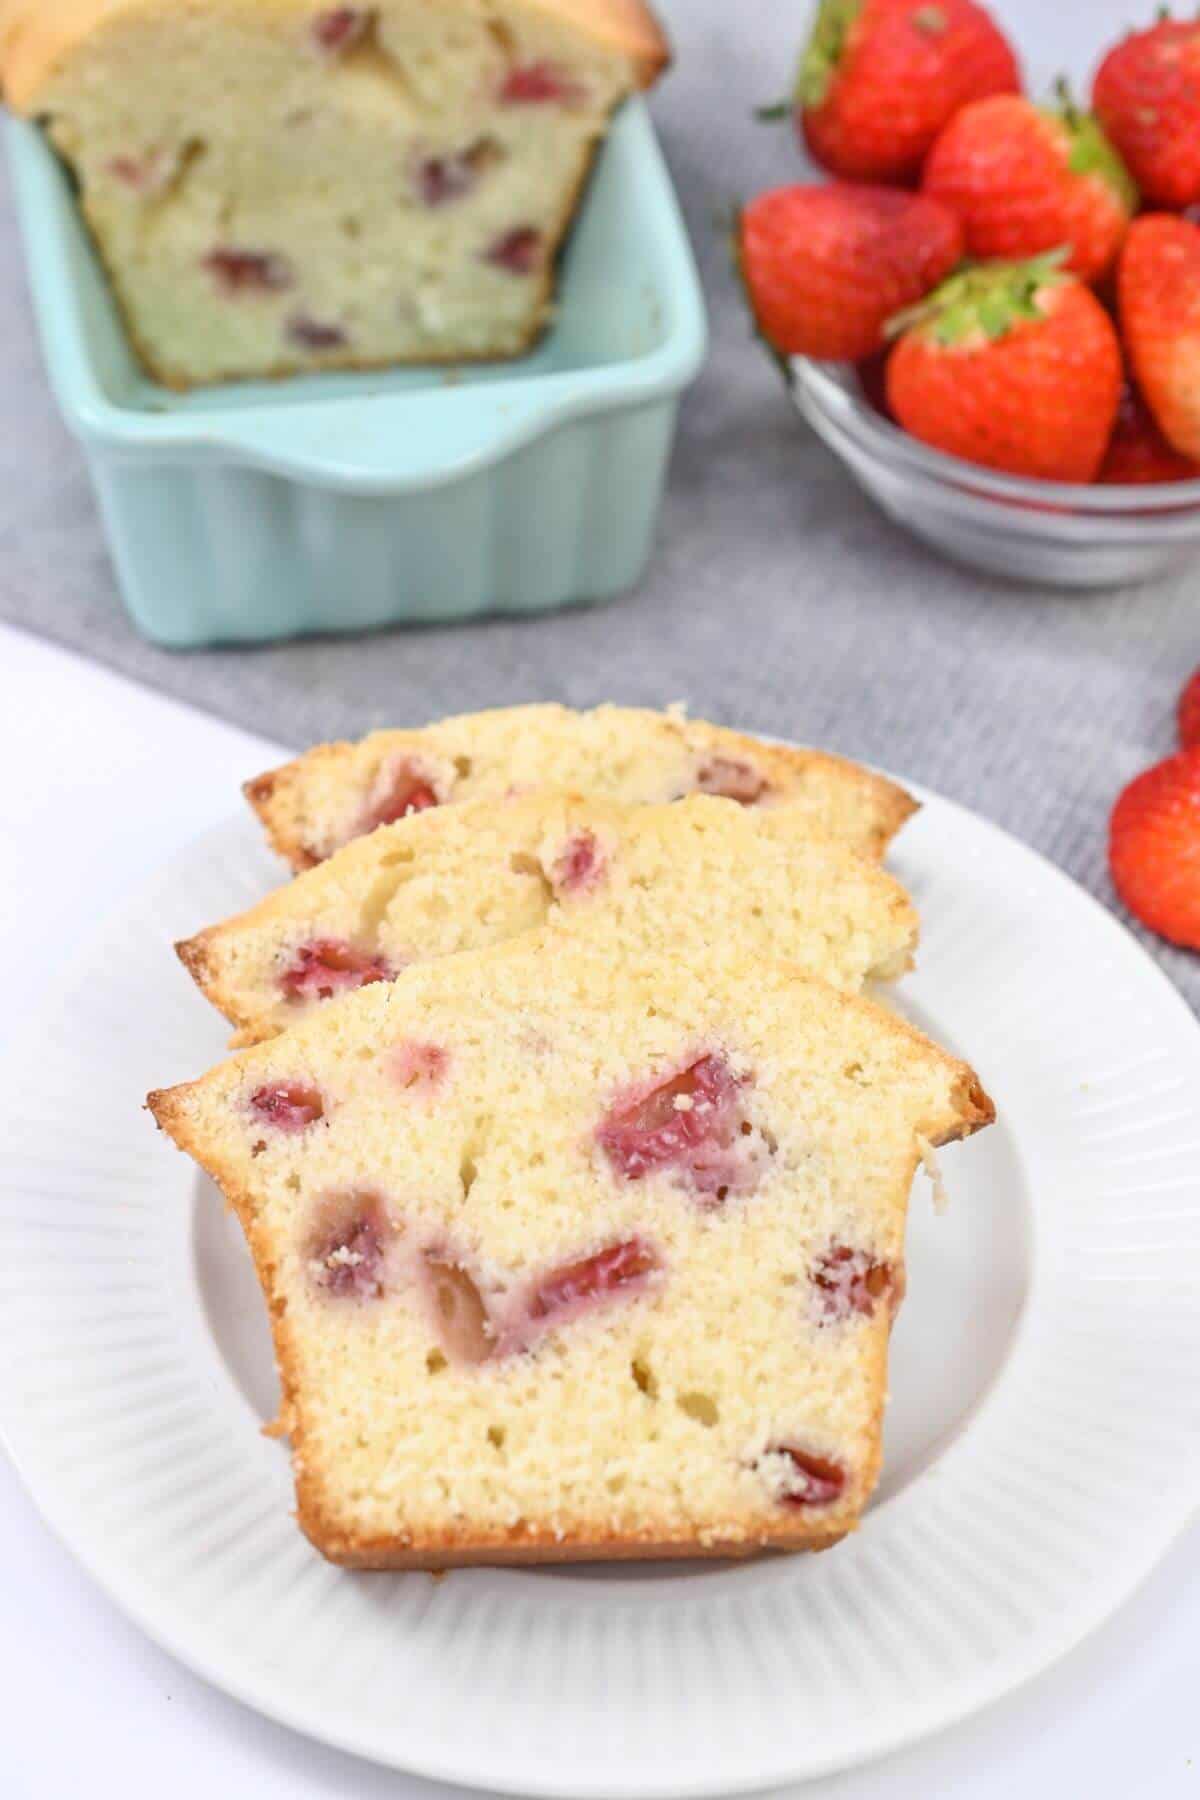 Strawberry pound cake slices with fresh strawberries served on a plate.